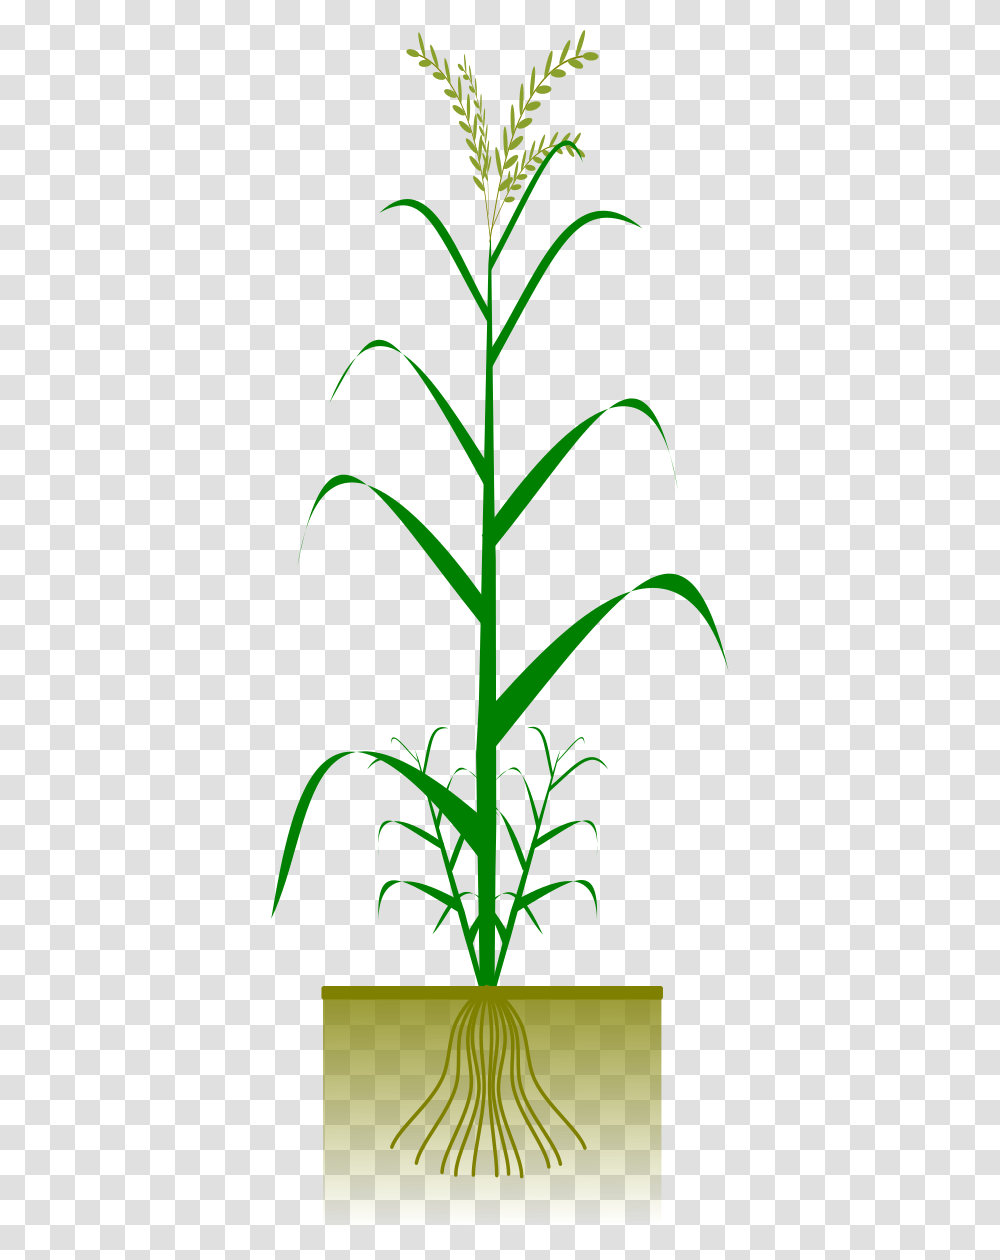 Cereal By Gsagri Science Maize Plant, Flower, Blossom, Produce, Food Transparent Png